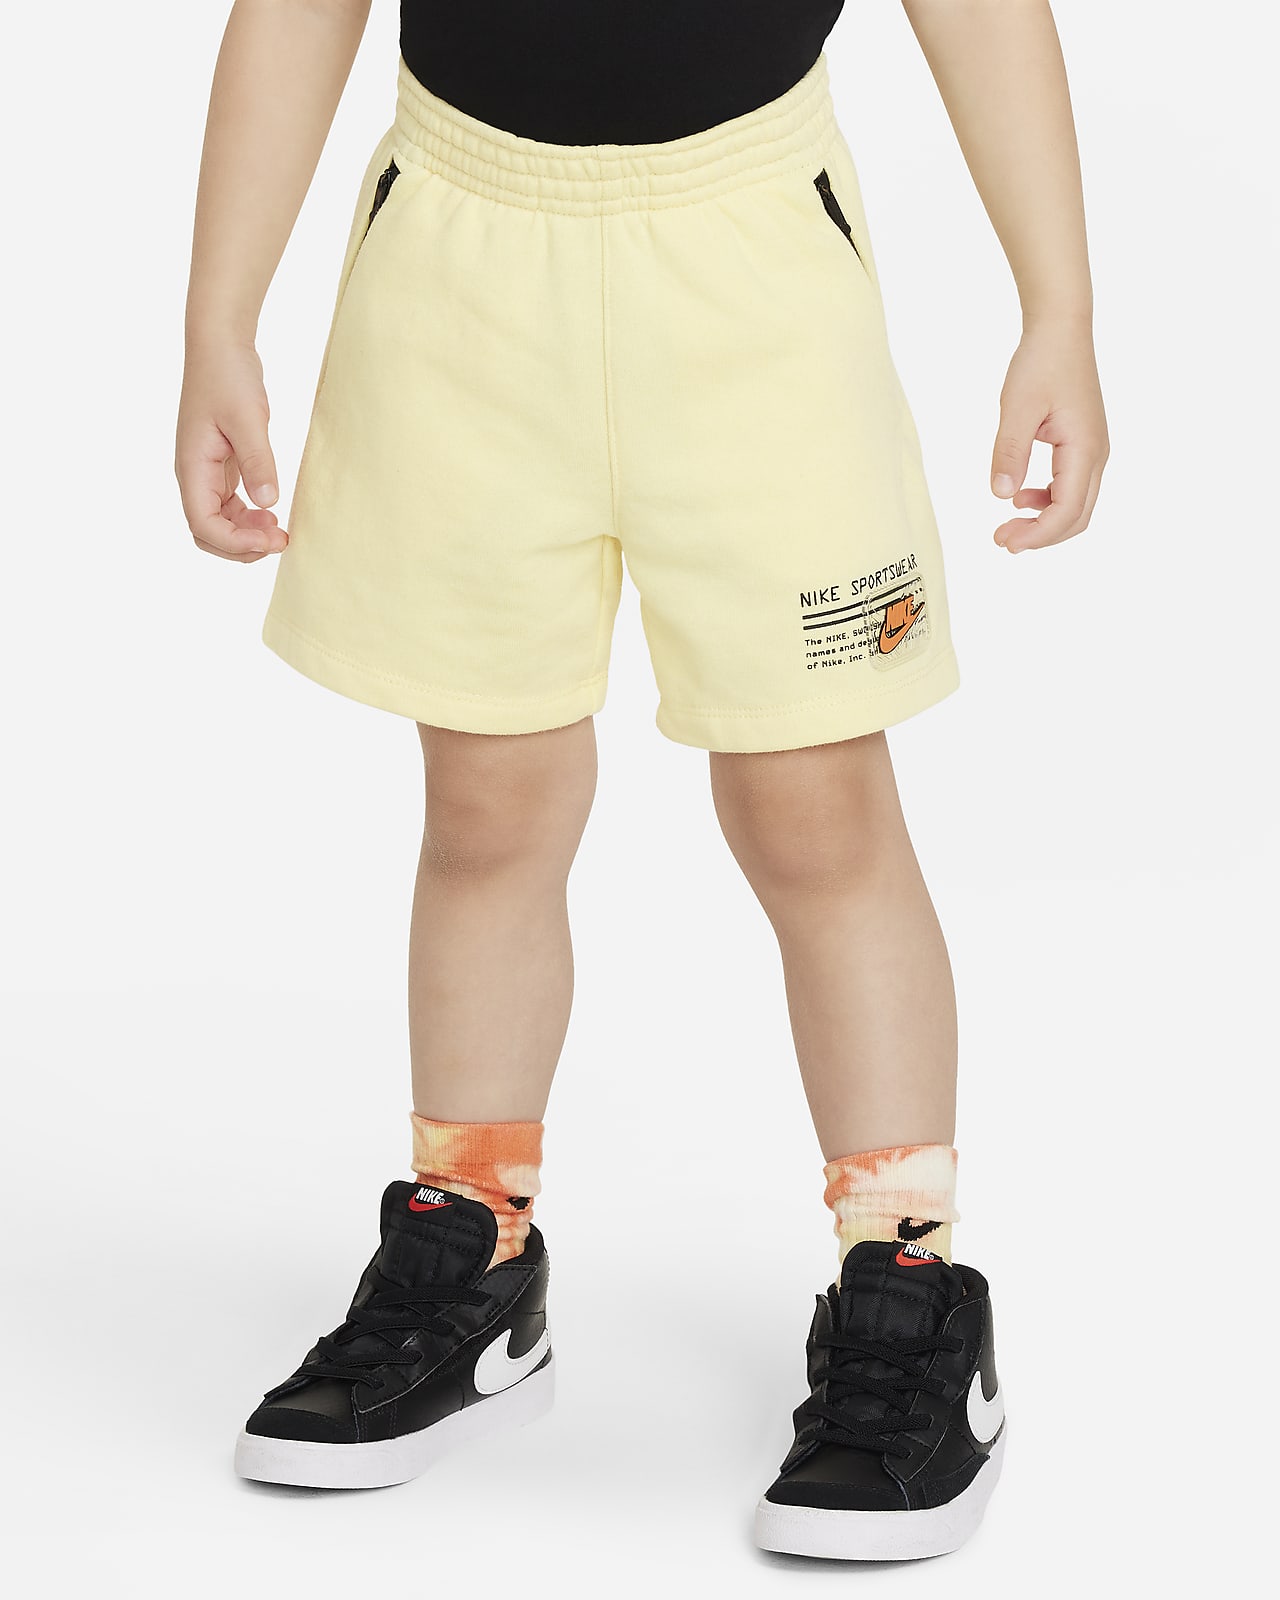 Nike Sportswear Paint Your Future Toddler French Terry Shorts